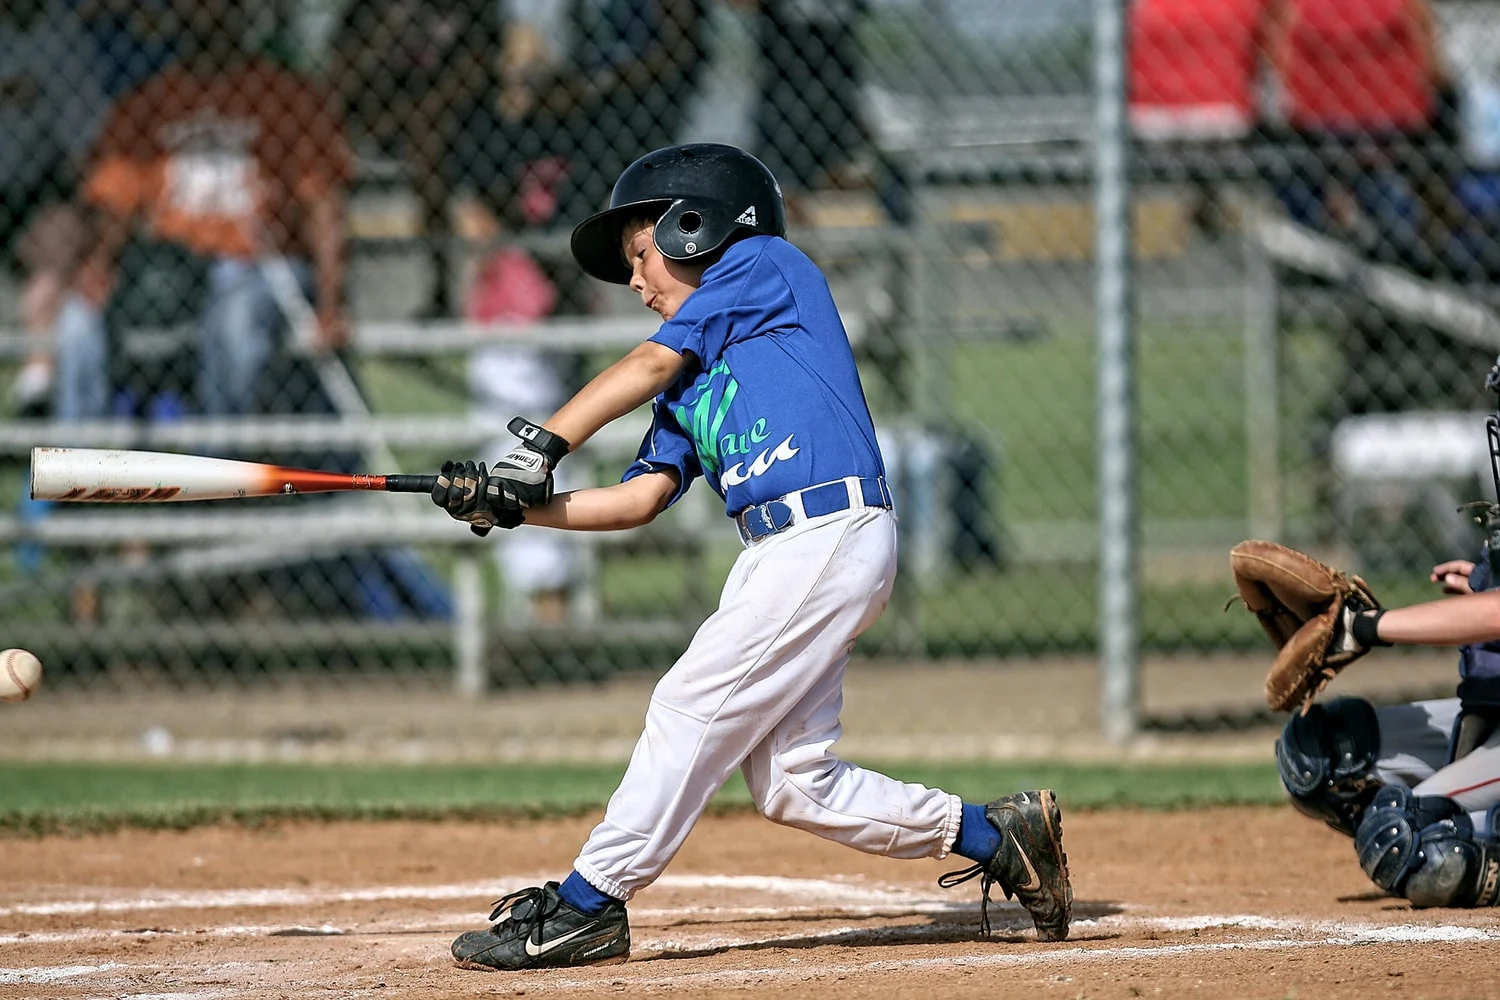 a youth baseball player getting a hit during a game